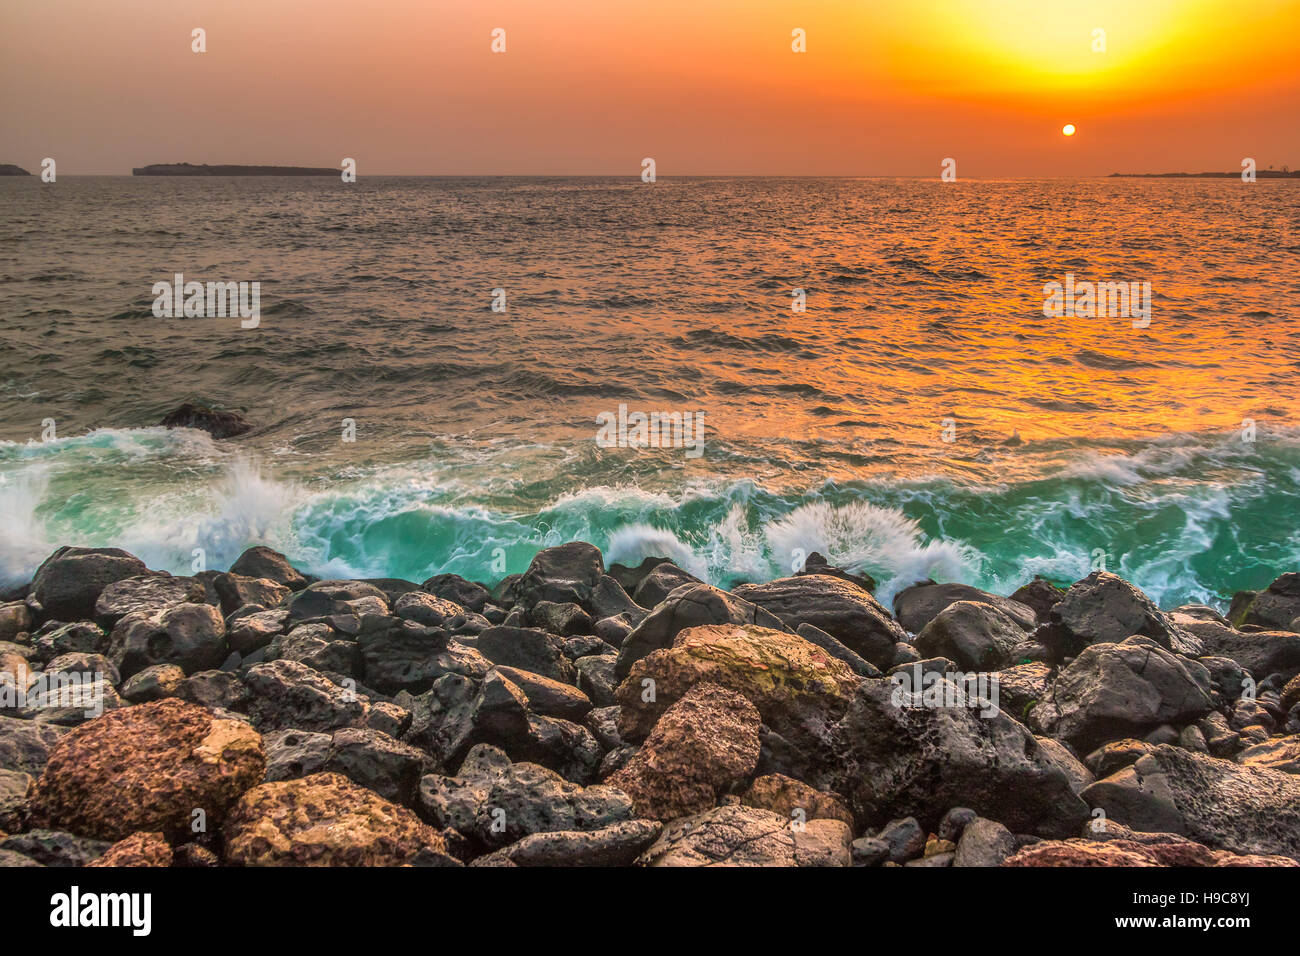 The beautiful waters of the Atlantic ocean with its rocky coastline near the City of Dakar in Senegal Stock Photo